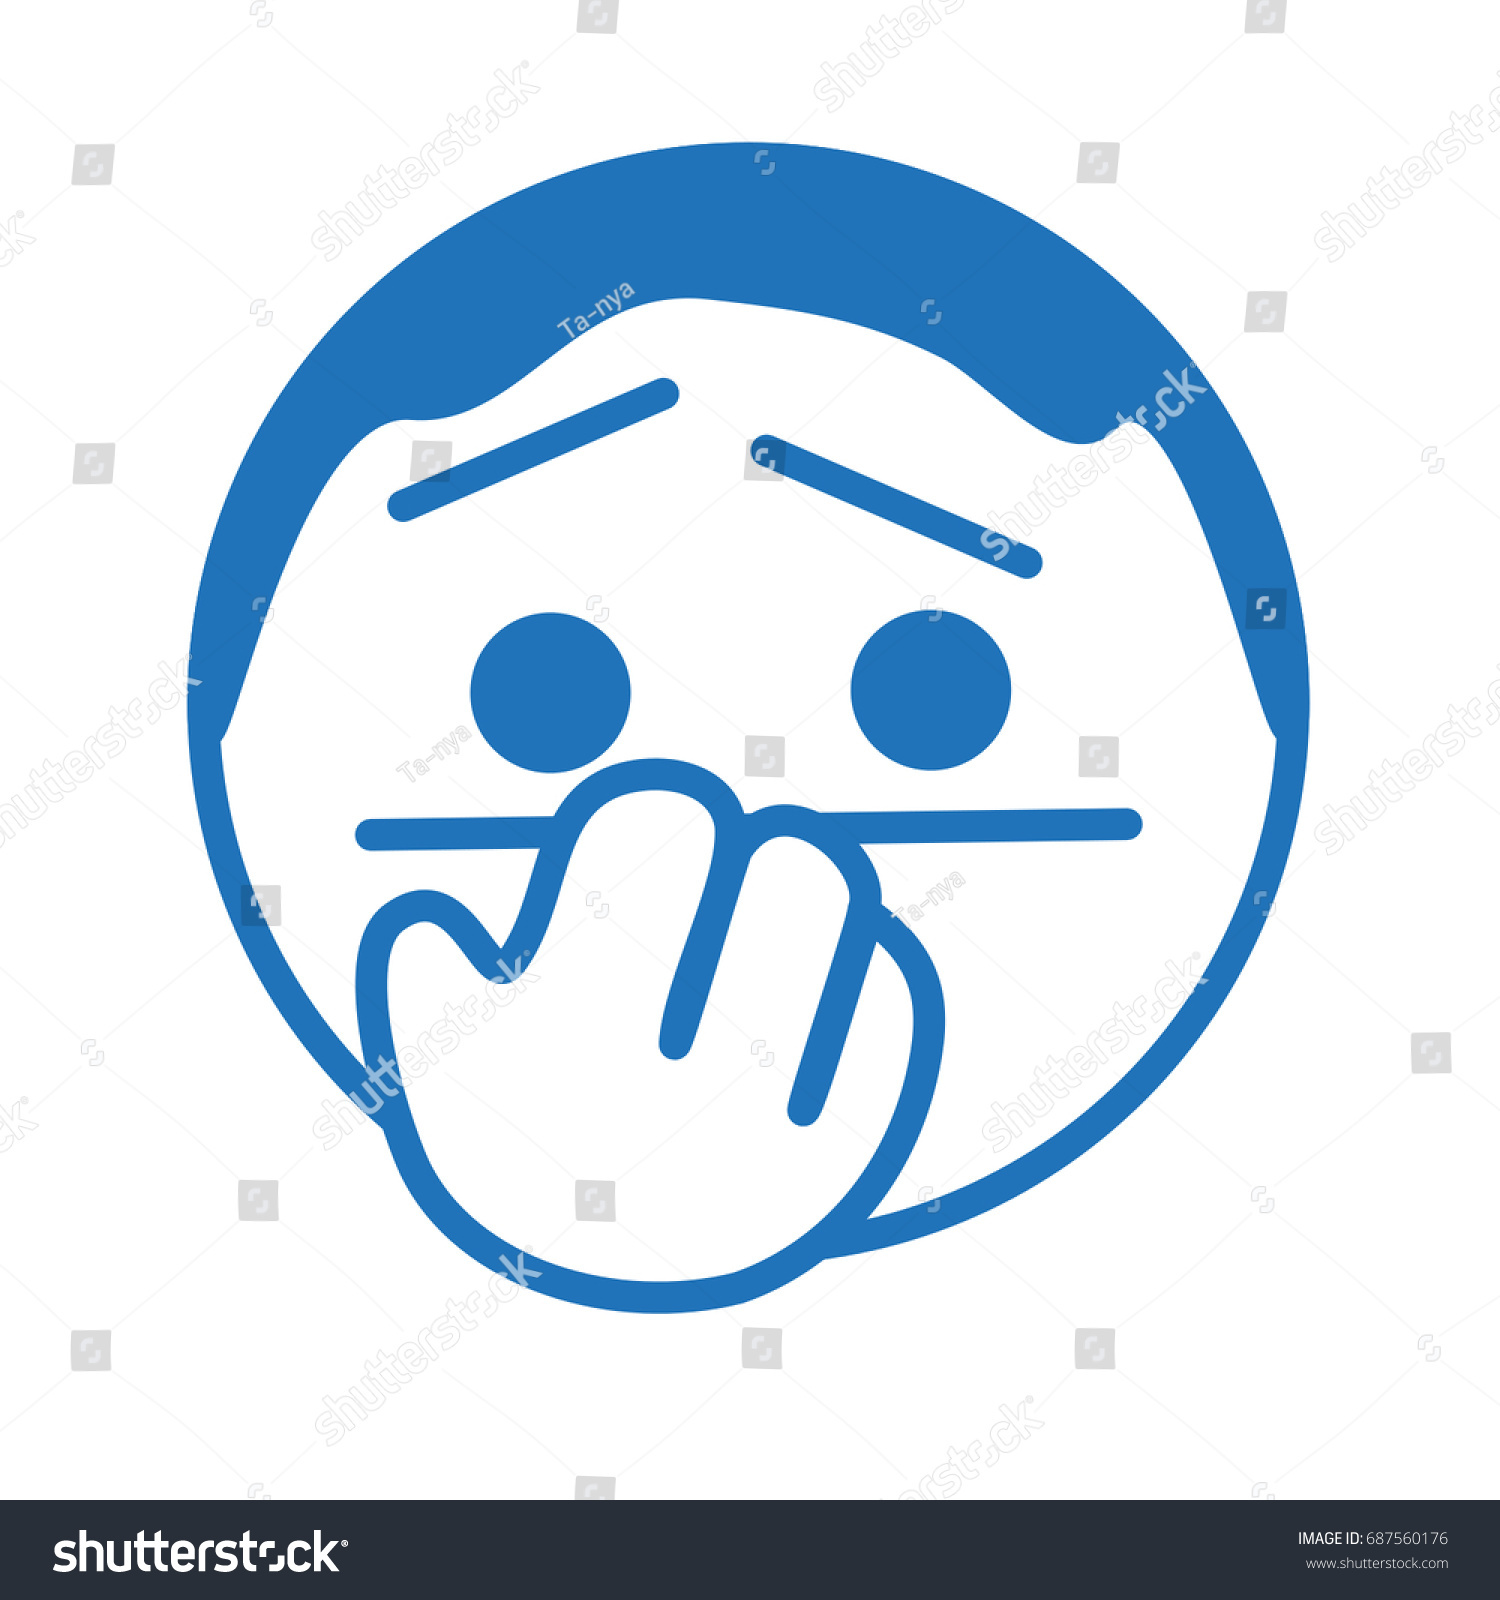 stock-vector-awkward-emoji-emoticon-palm-covering-mouth-gesture-simplistic-facial-expression-vector-687560176.jpg